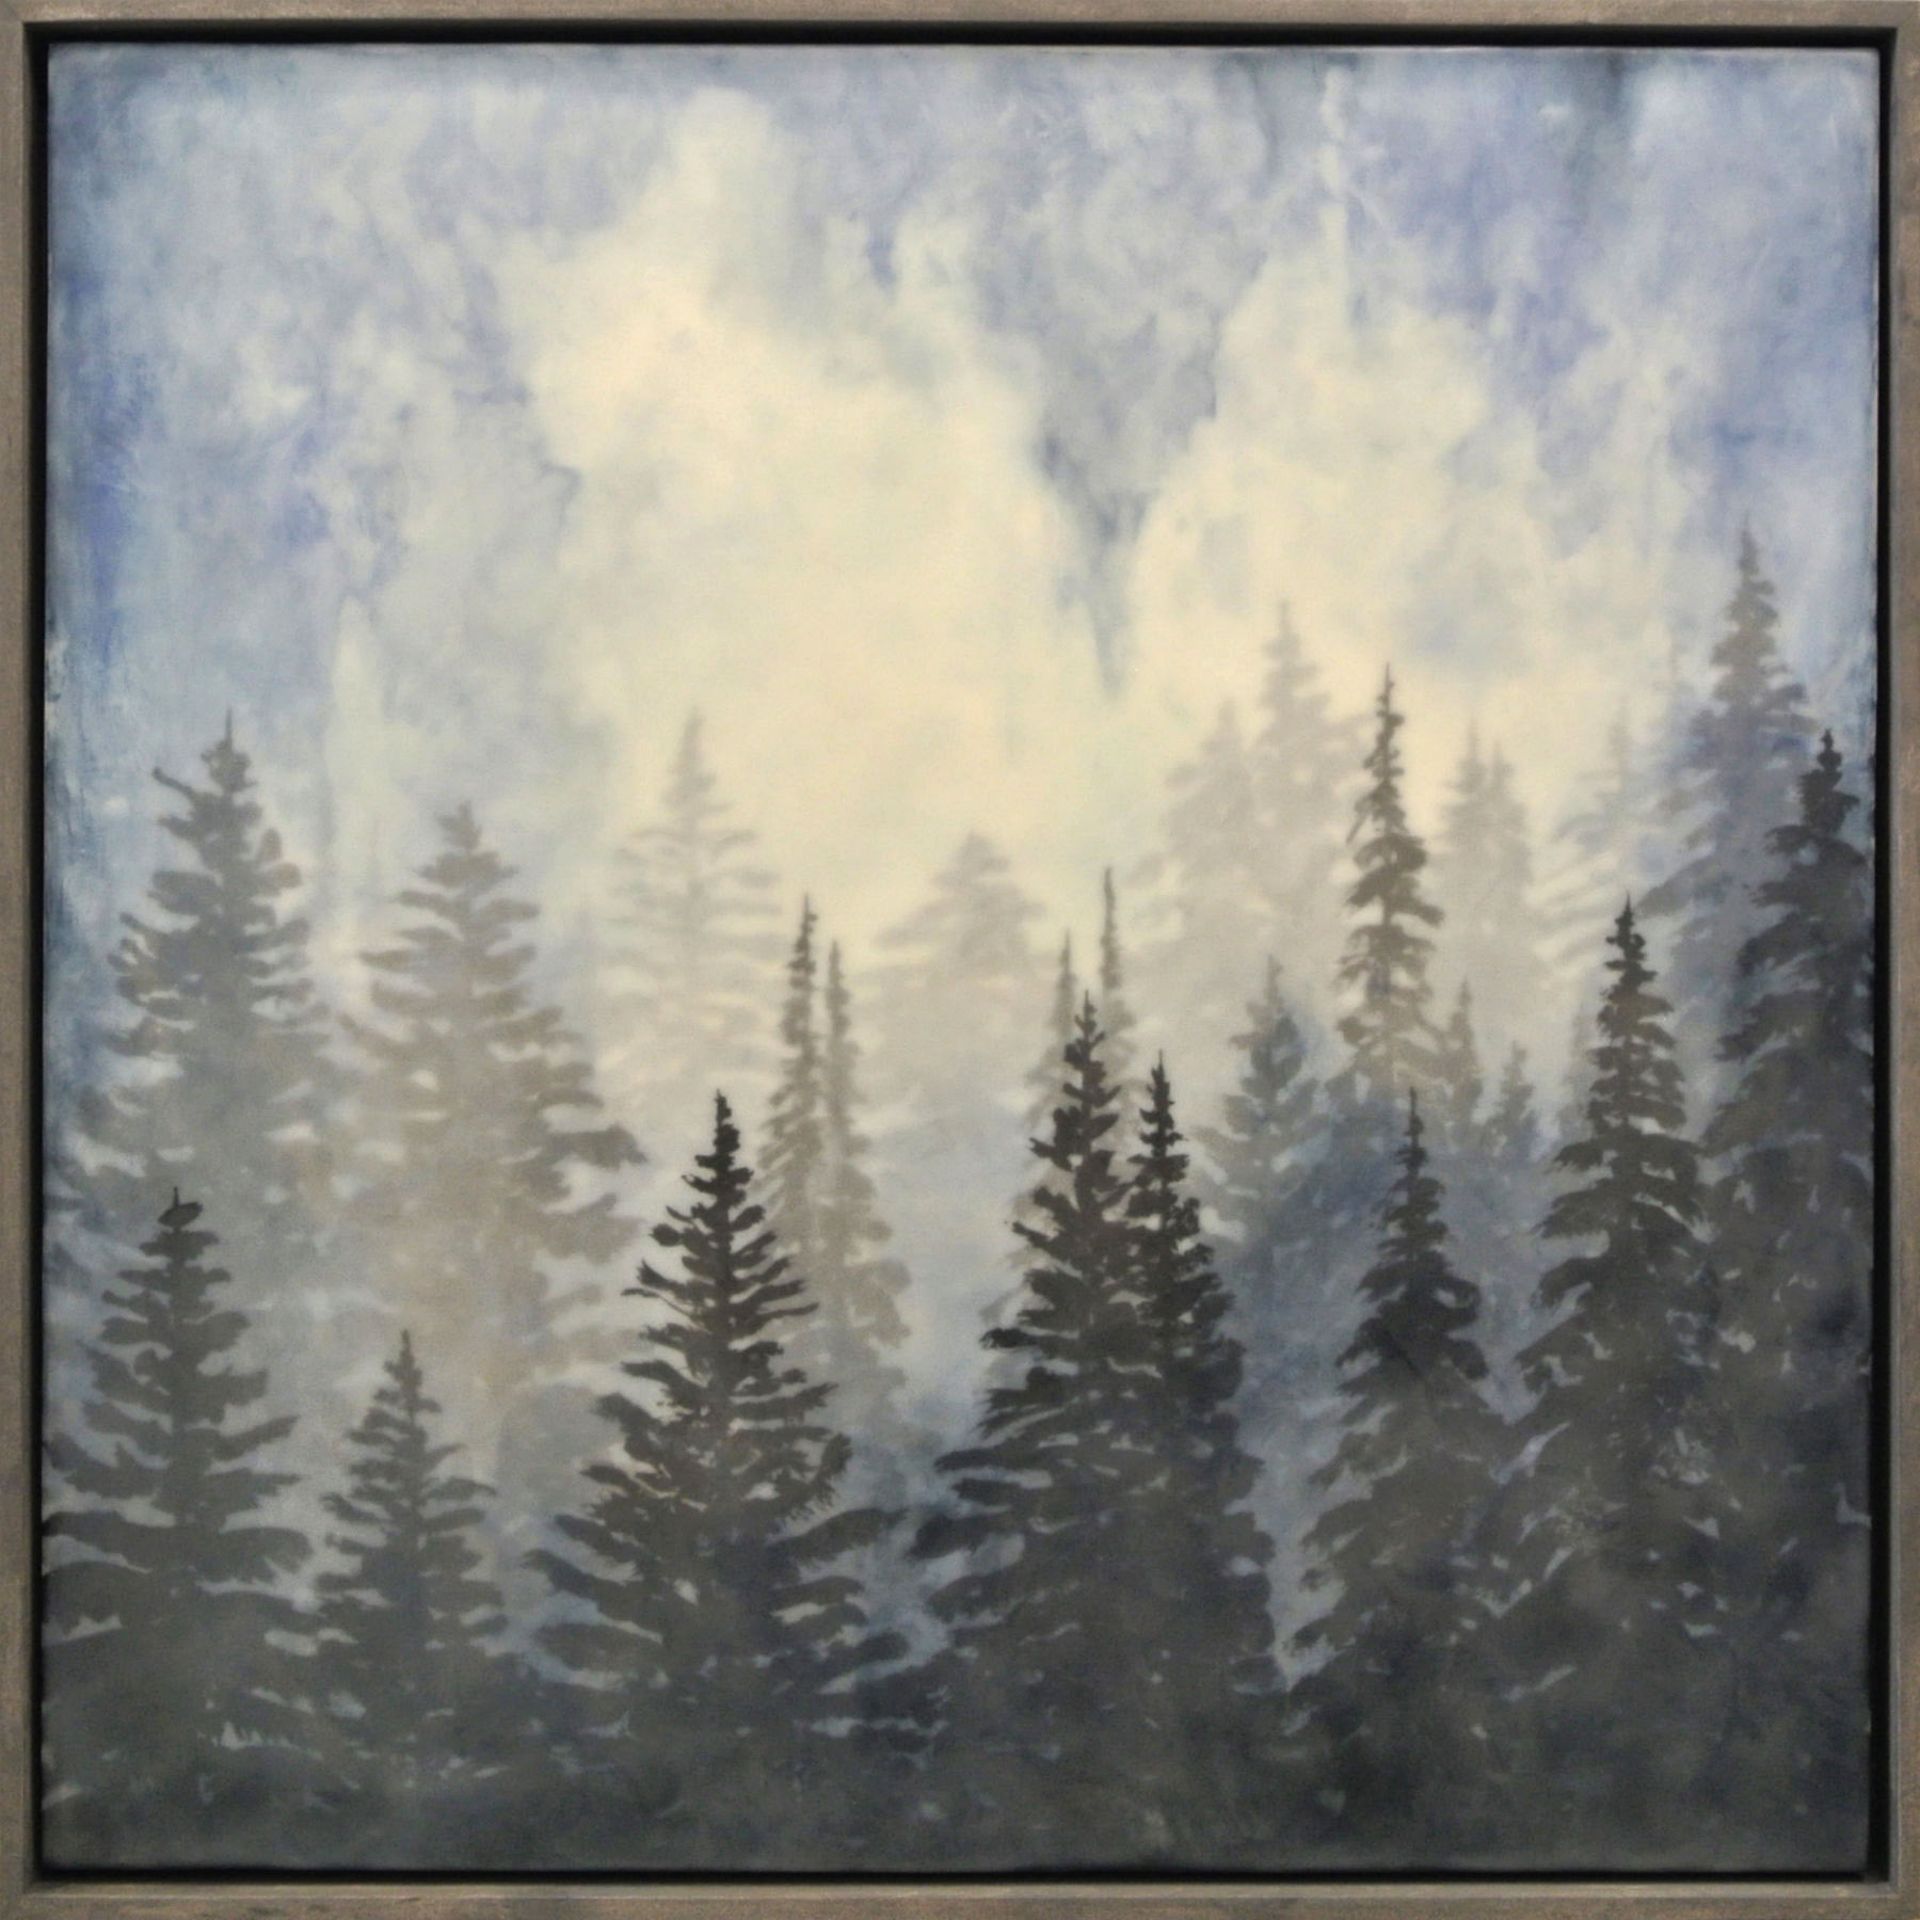 A Dreamy Encaustic Painting Featuring Pine Trees With Green And Blue Hues By Bridgette Meinhold, Available At Gallery Wild